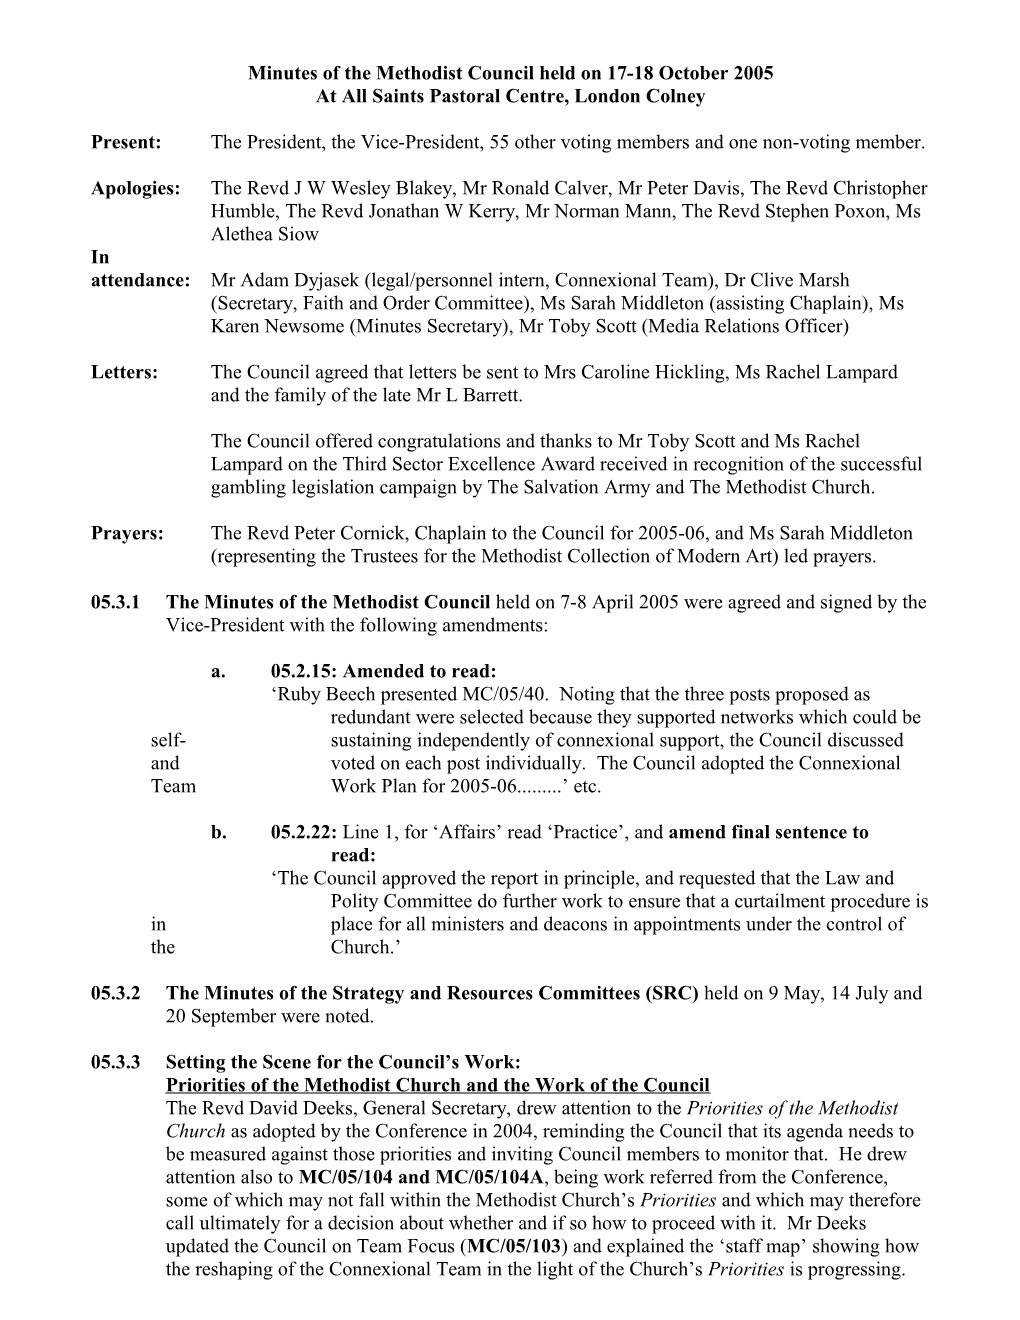 Minutes of the Methodist Council Held on 17-18 October 2005